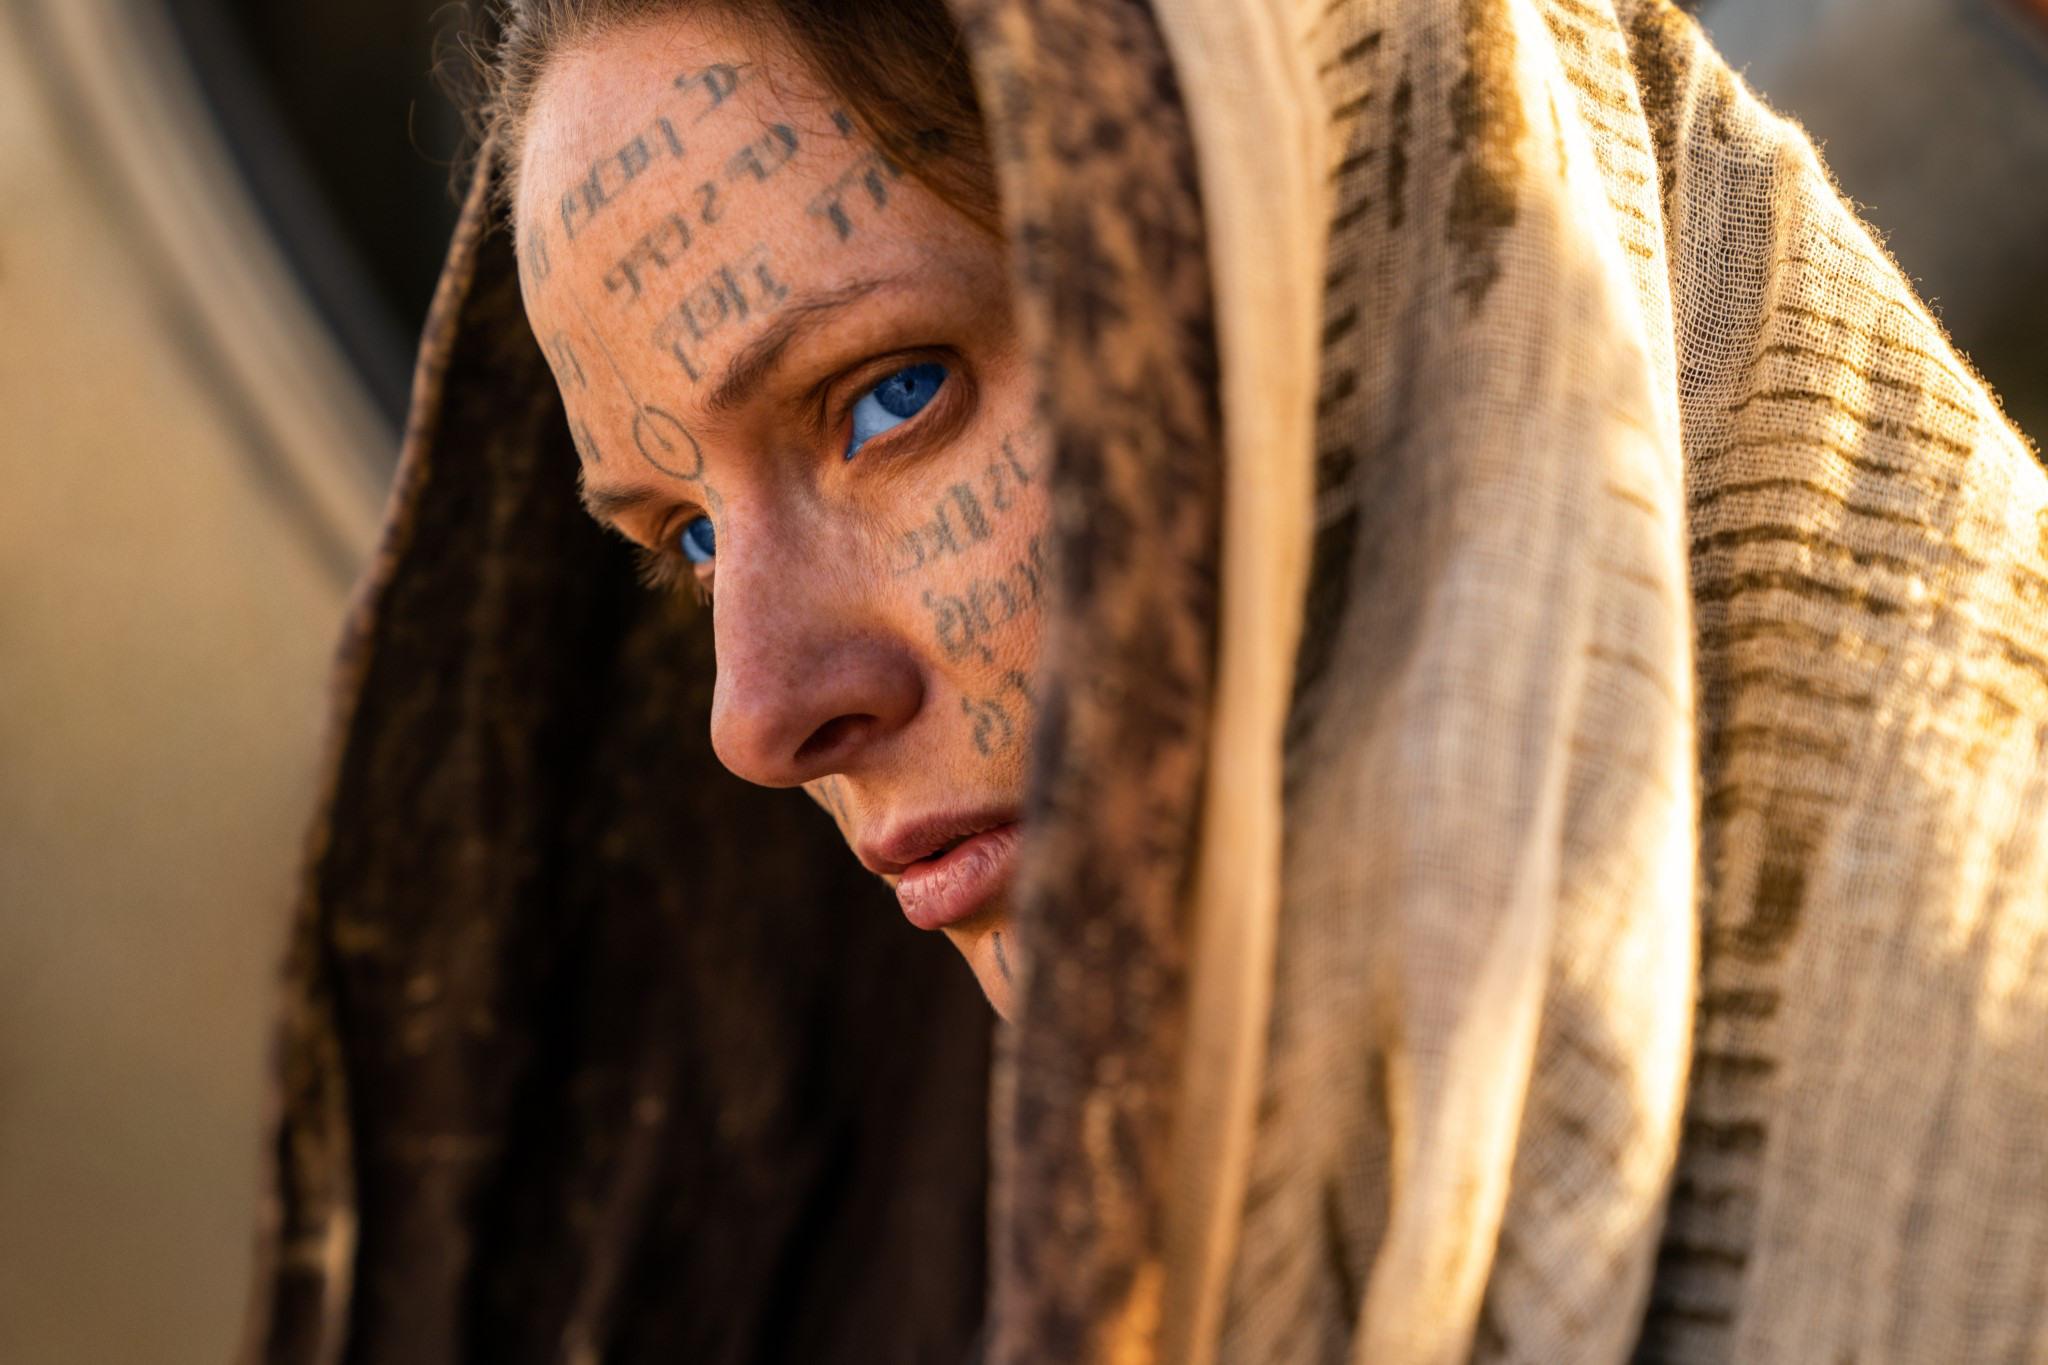 A woman with a shawl on her head and what looks like tatooed letters on her face.